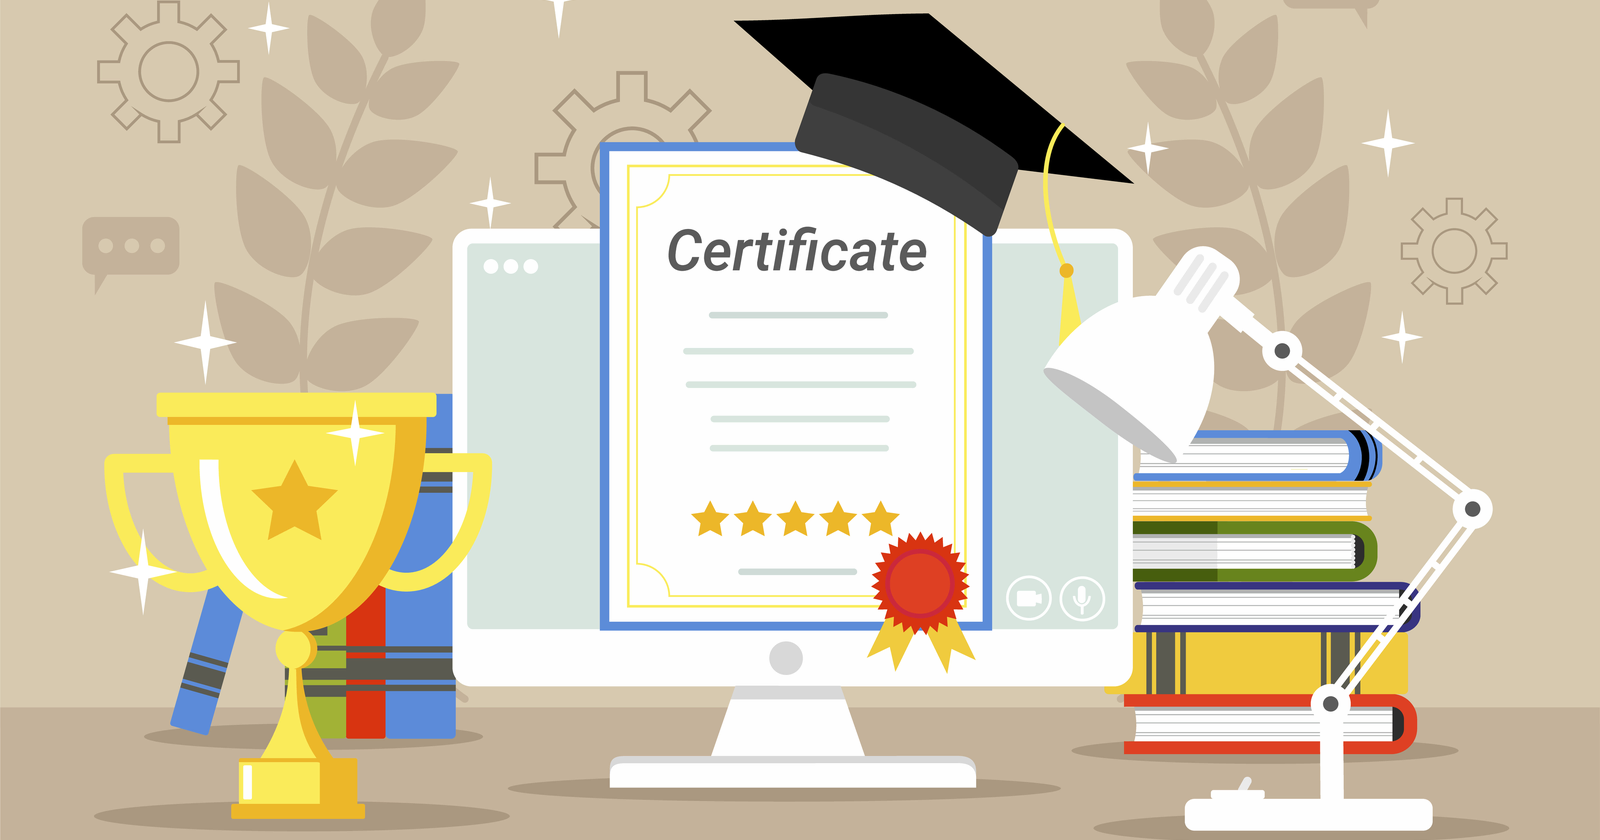 How To Acquire Google Career Certificates To Advance Your Career